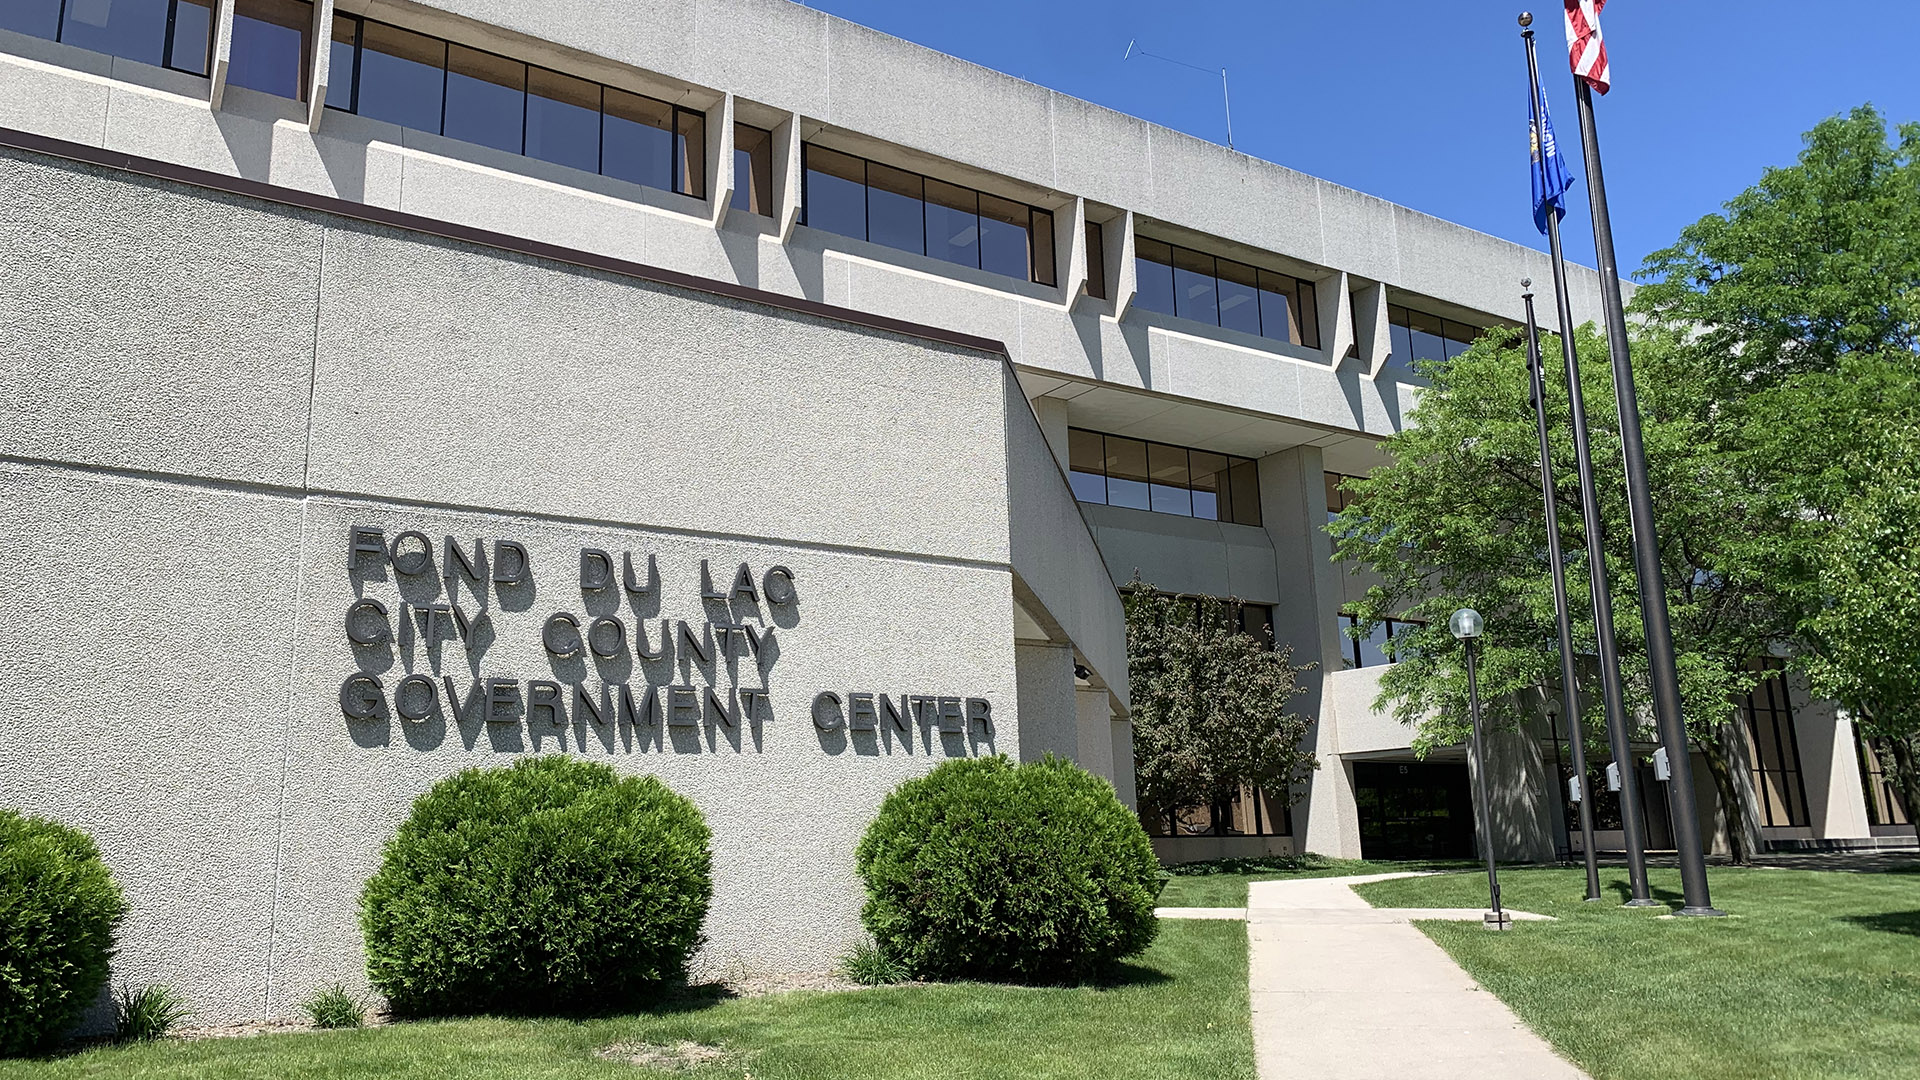 Flagpoles flying the U.S. and Wisconsin flags stand near trees and bushes in front of a multi-story concrete building with a sign reading "Fond du Lac City County Government Center."